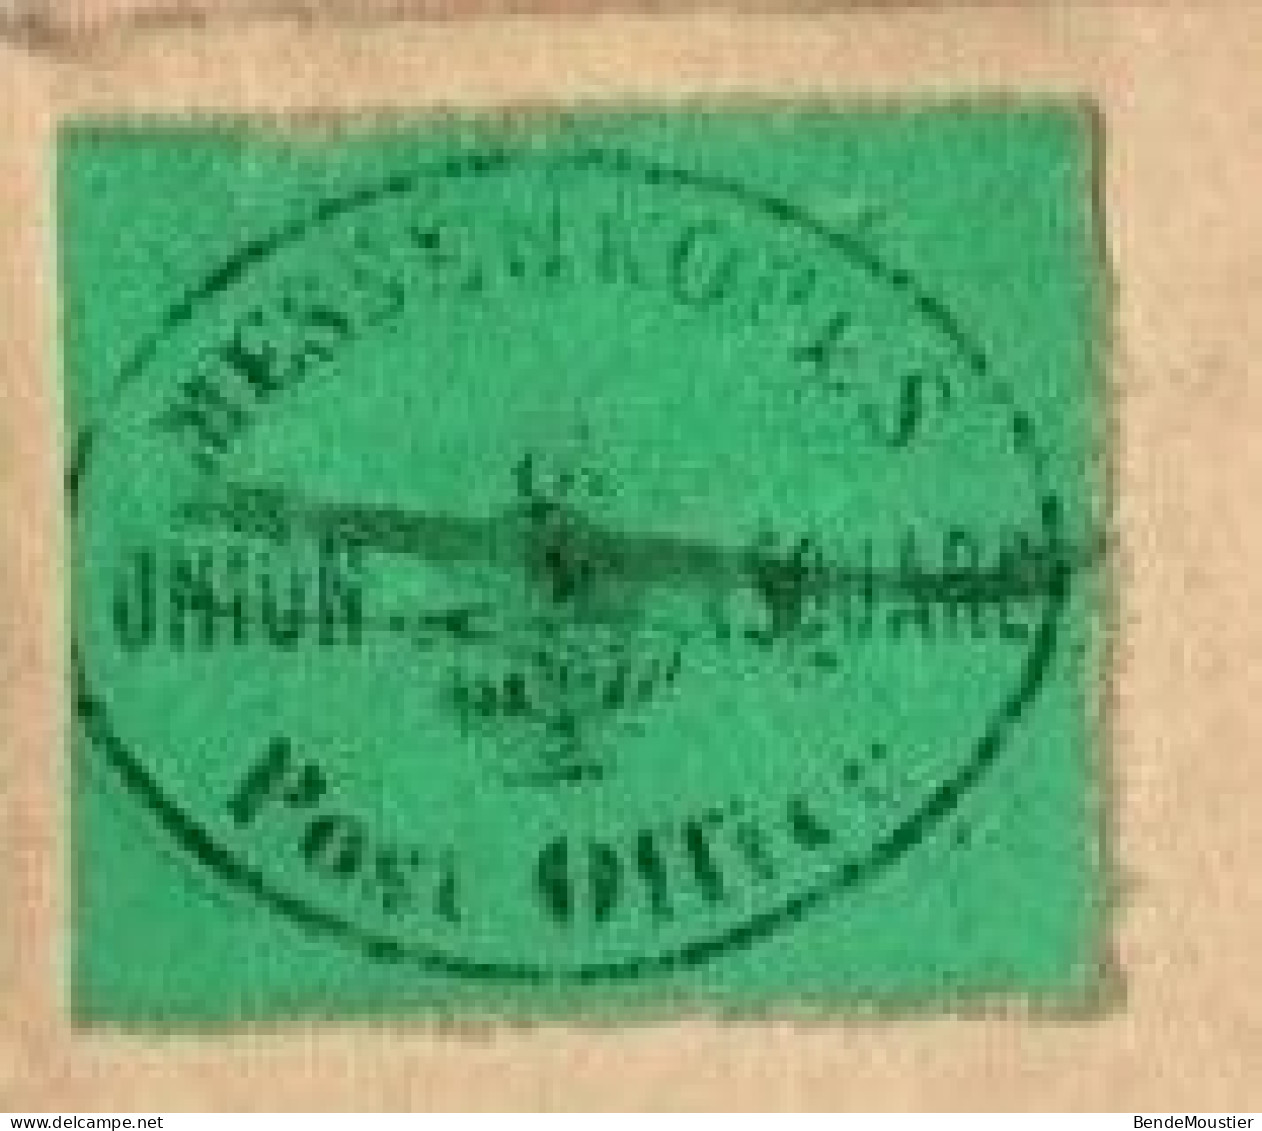 (R122) SCOTT # 106 L1  (L217) - Black On Green - Red Handstamp - Messenkope's Union Square Post Office - 1849. - Lokale Post